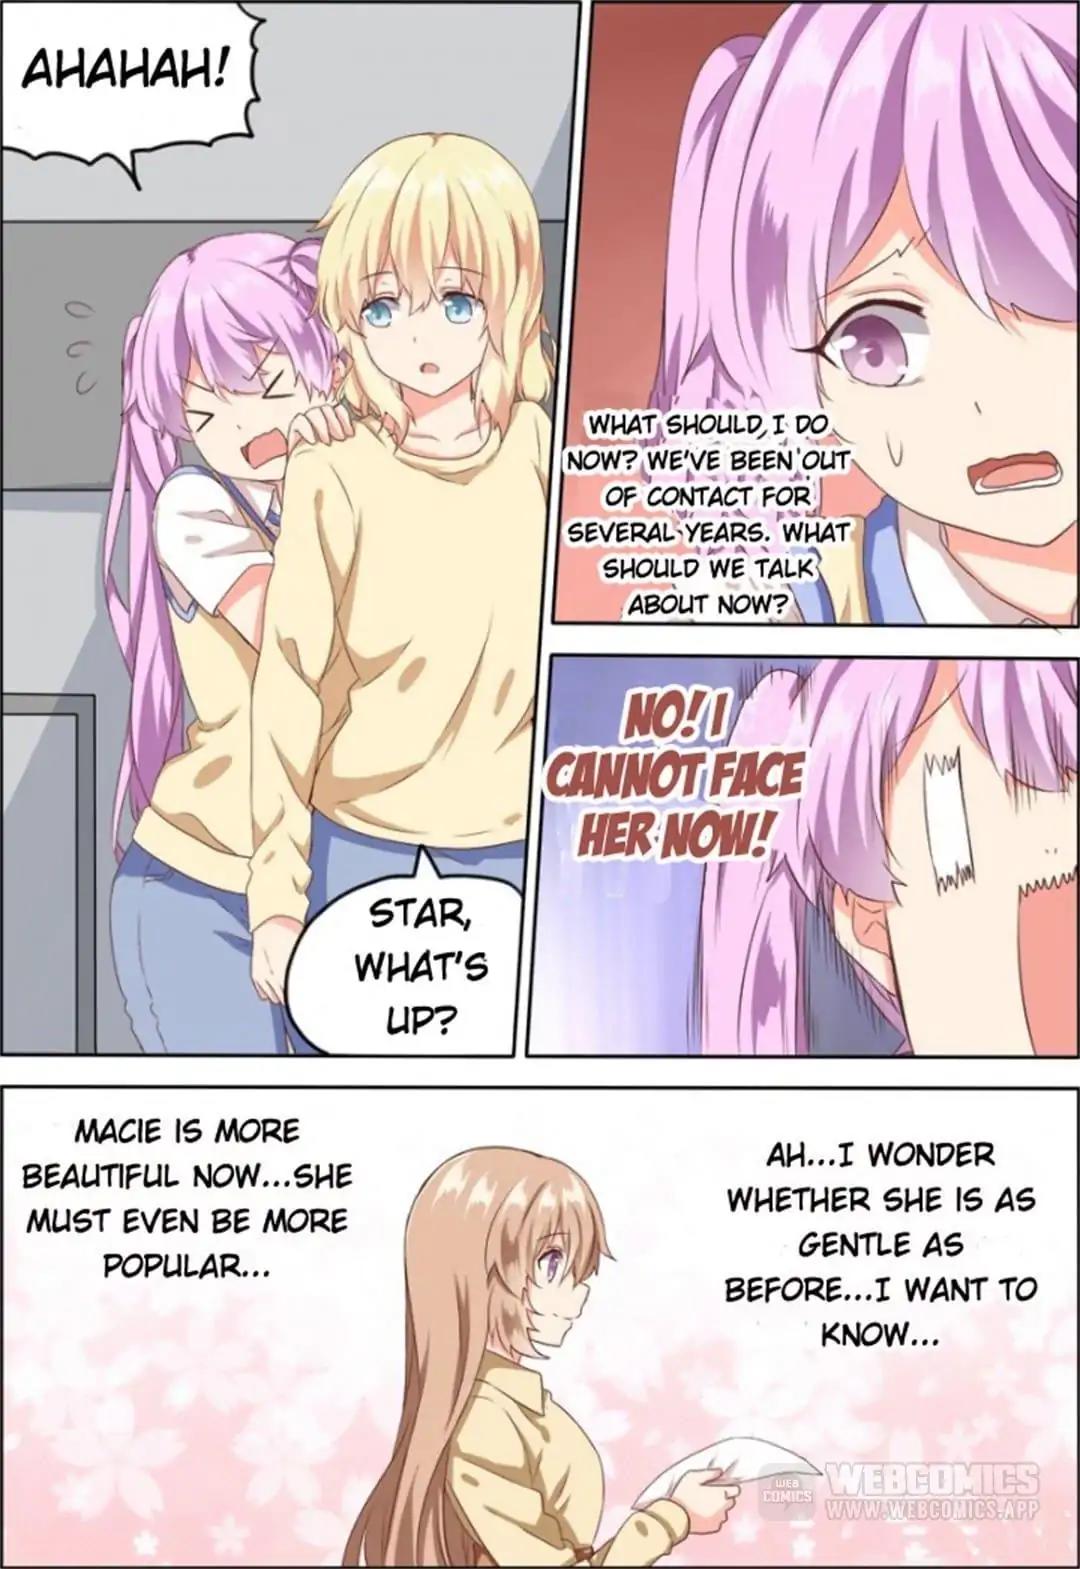 Why Did I, the MC Of Gal Game Jump Into A World Of Yuri Comic? Chapter 27